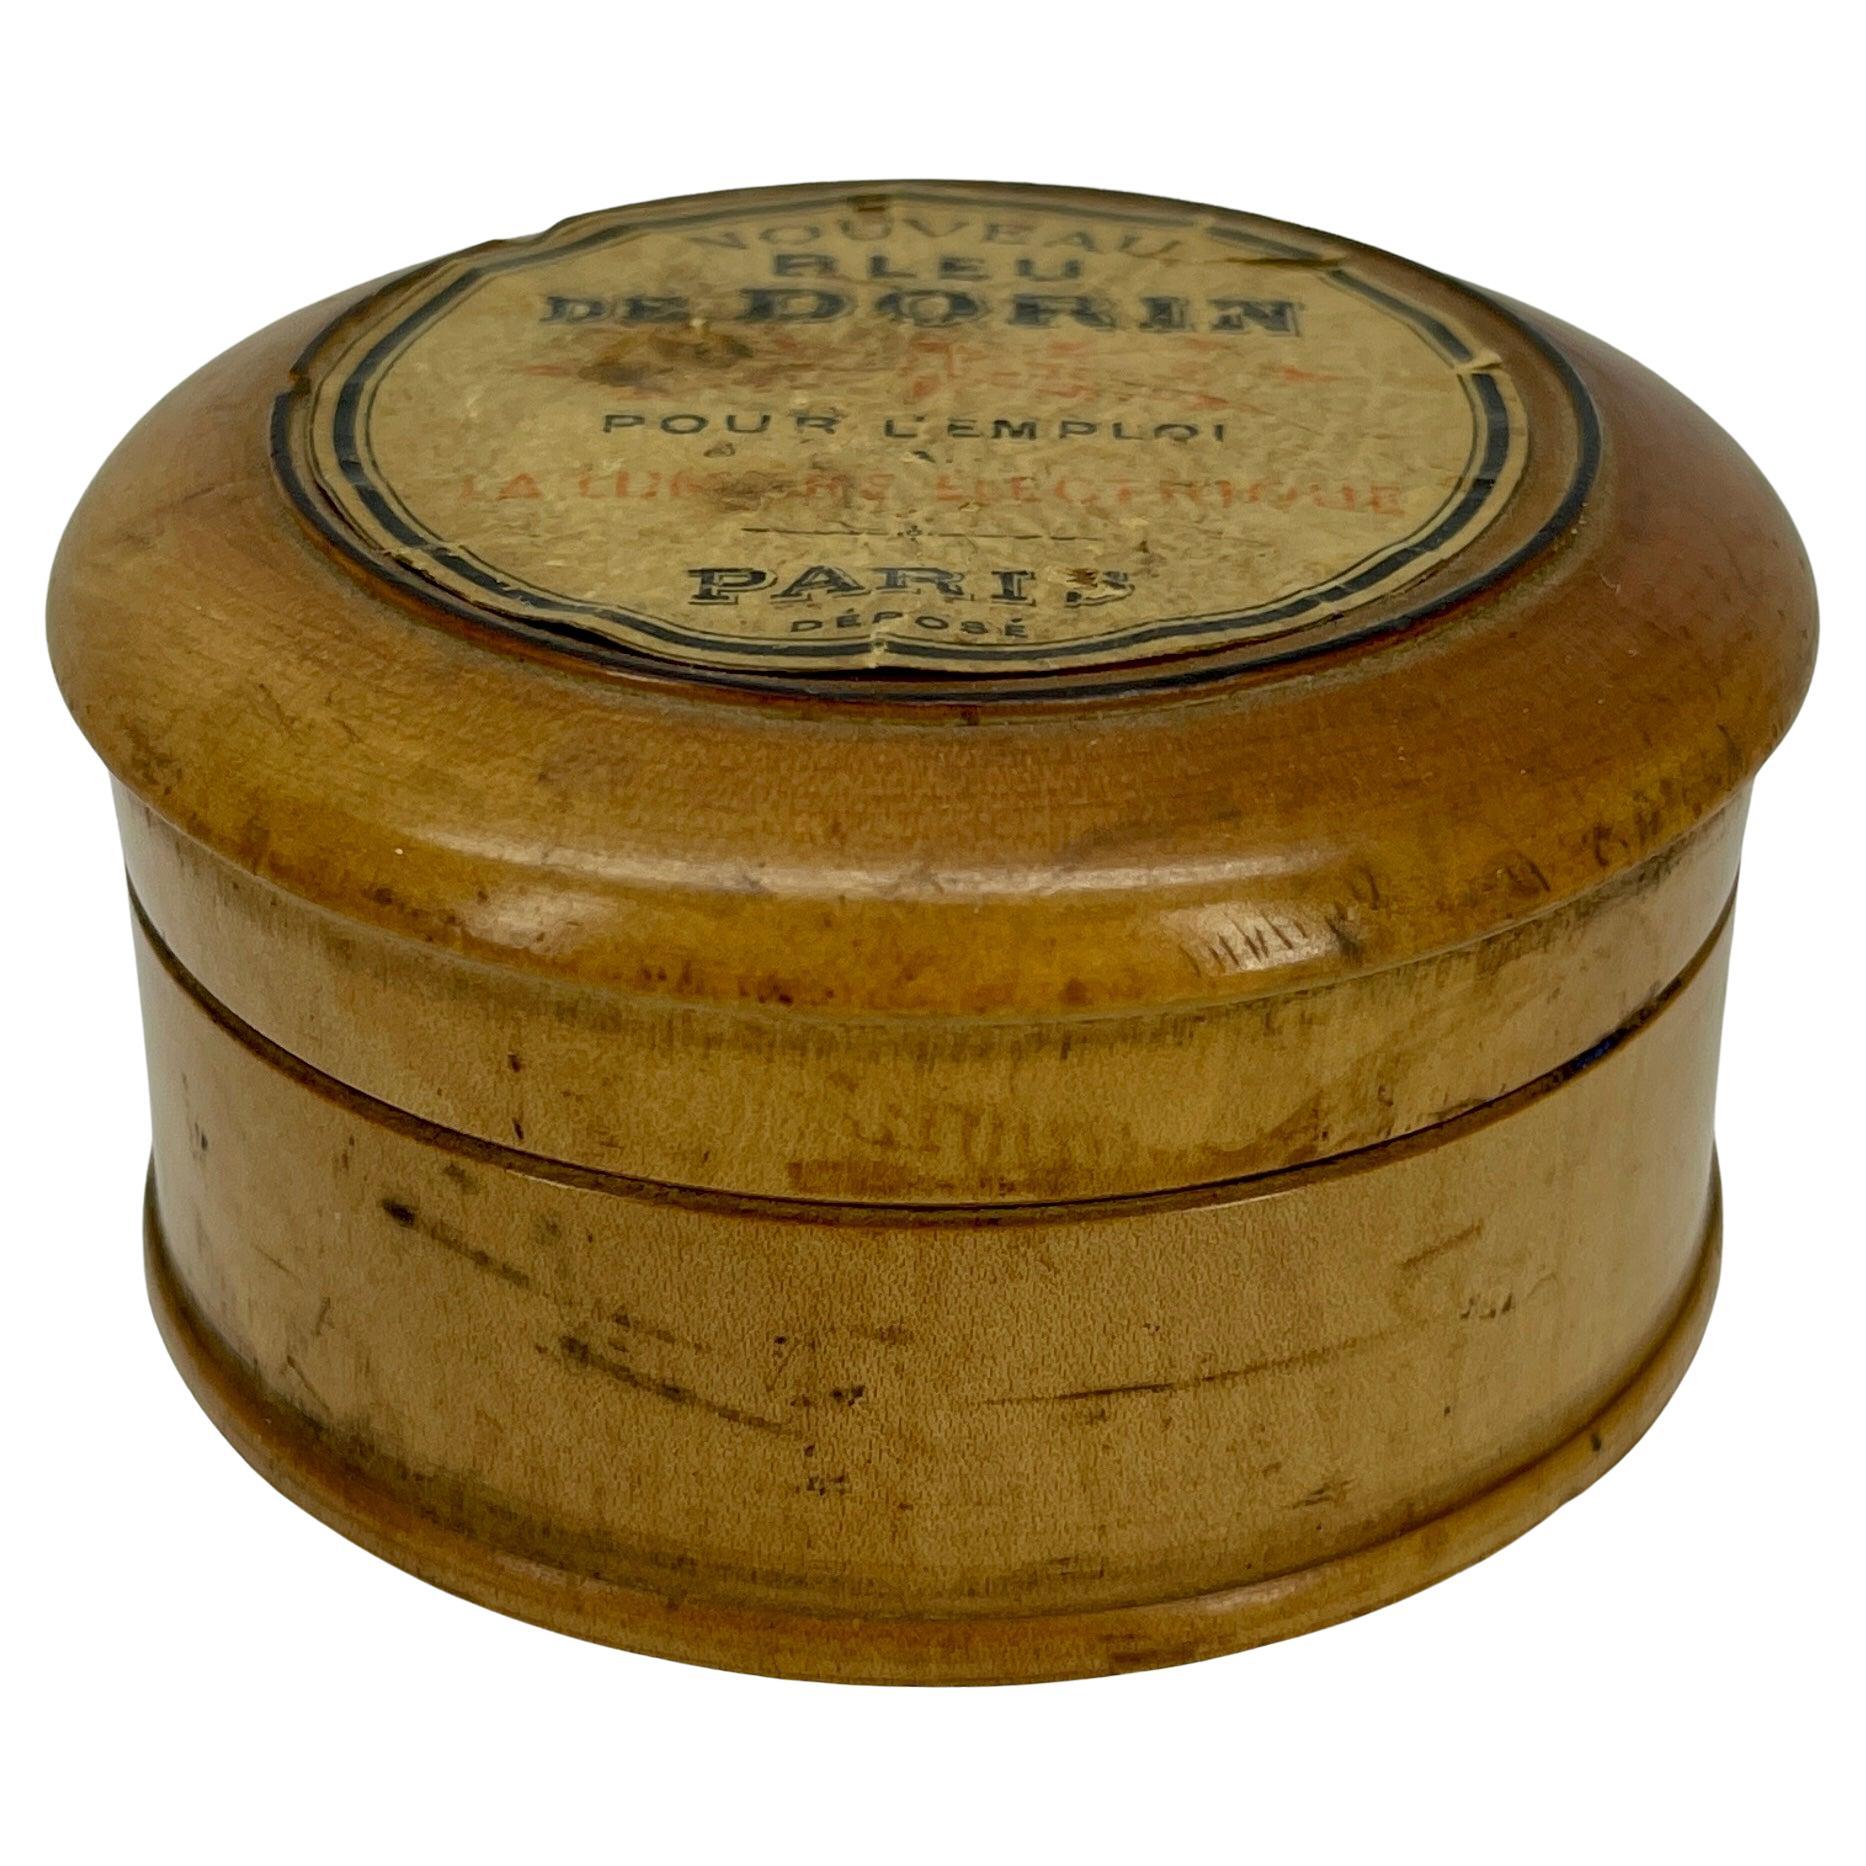 Art Deco woman's cosmetic face powder box. This petite wooden box has it's original label on top reading Blue De Dorin; a well known French toiletry company. The vanity box is sweet and simply elegant sitting on display in a boudoir or bathroom. Add